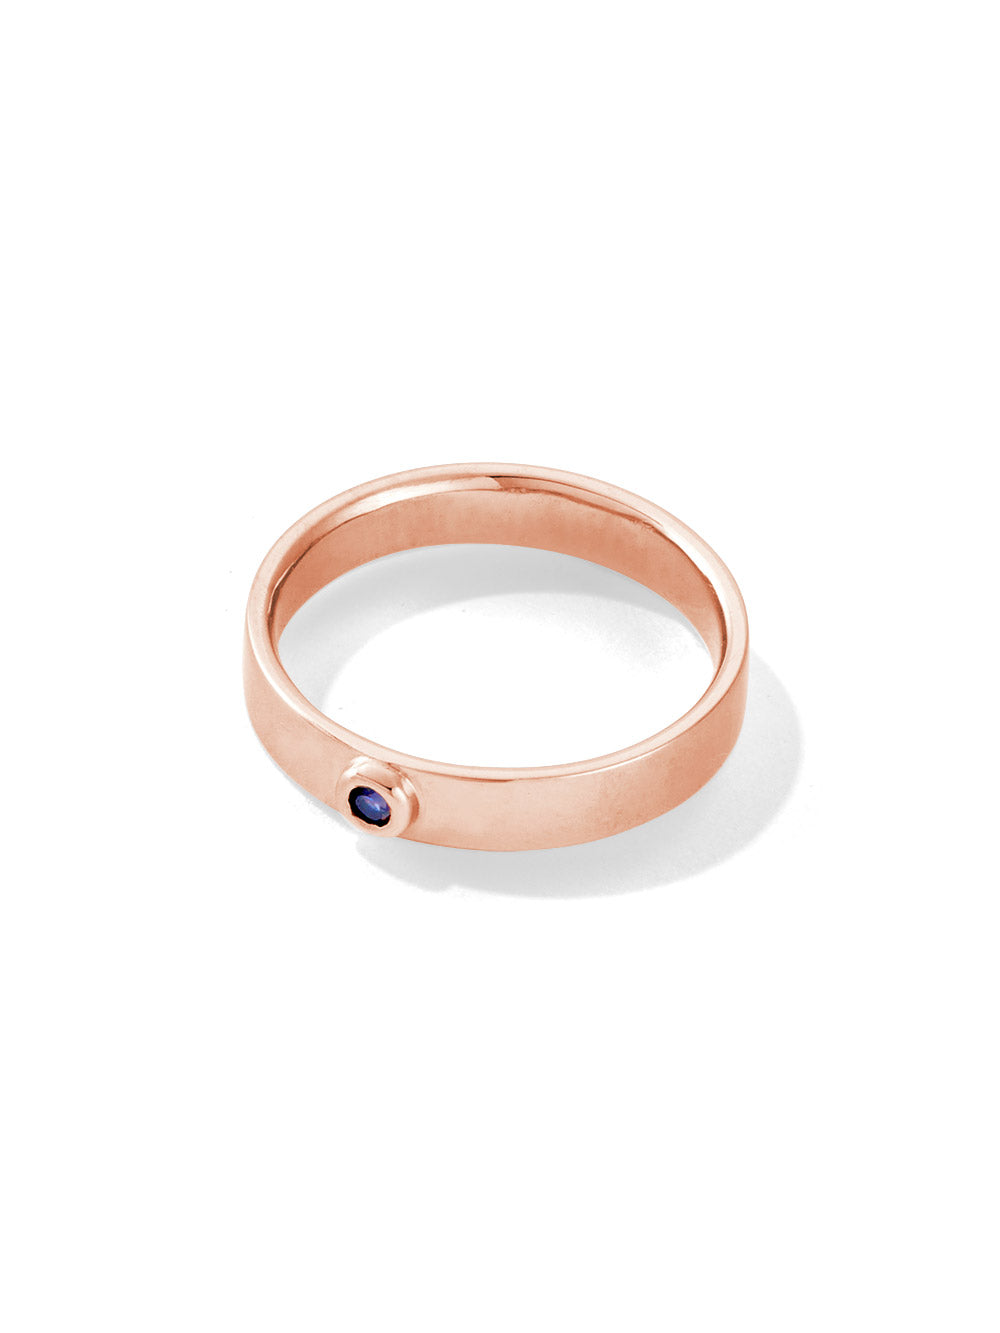 loyal + wise ring | blue sapphire